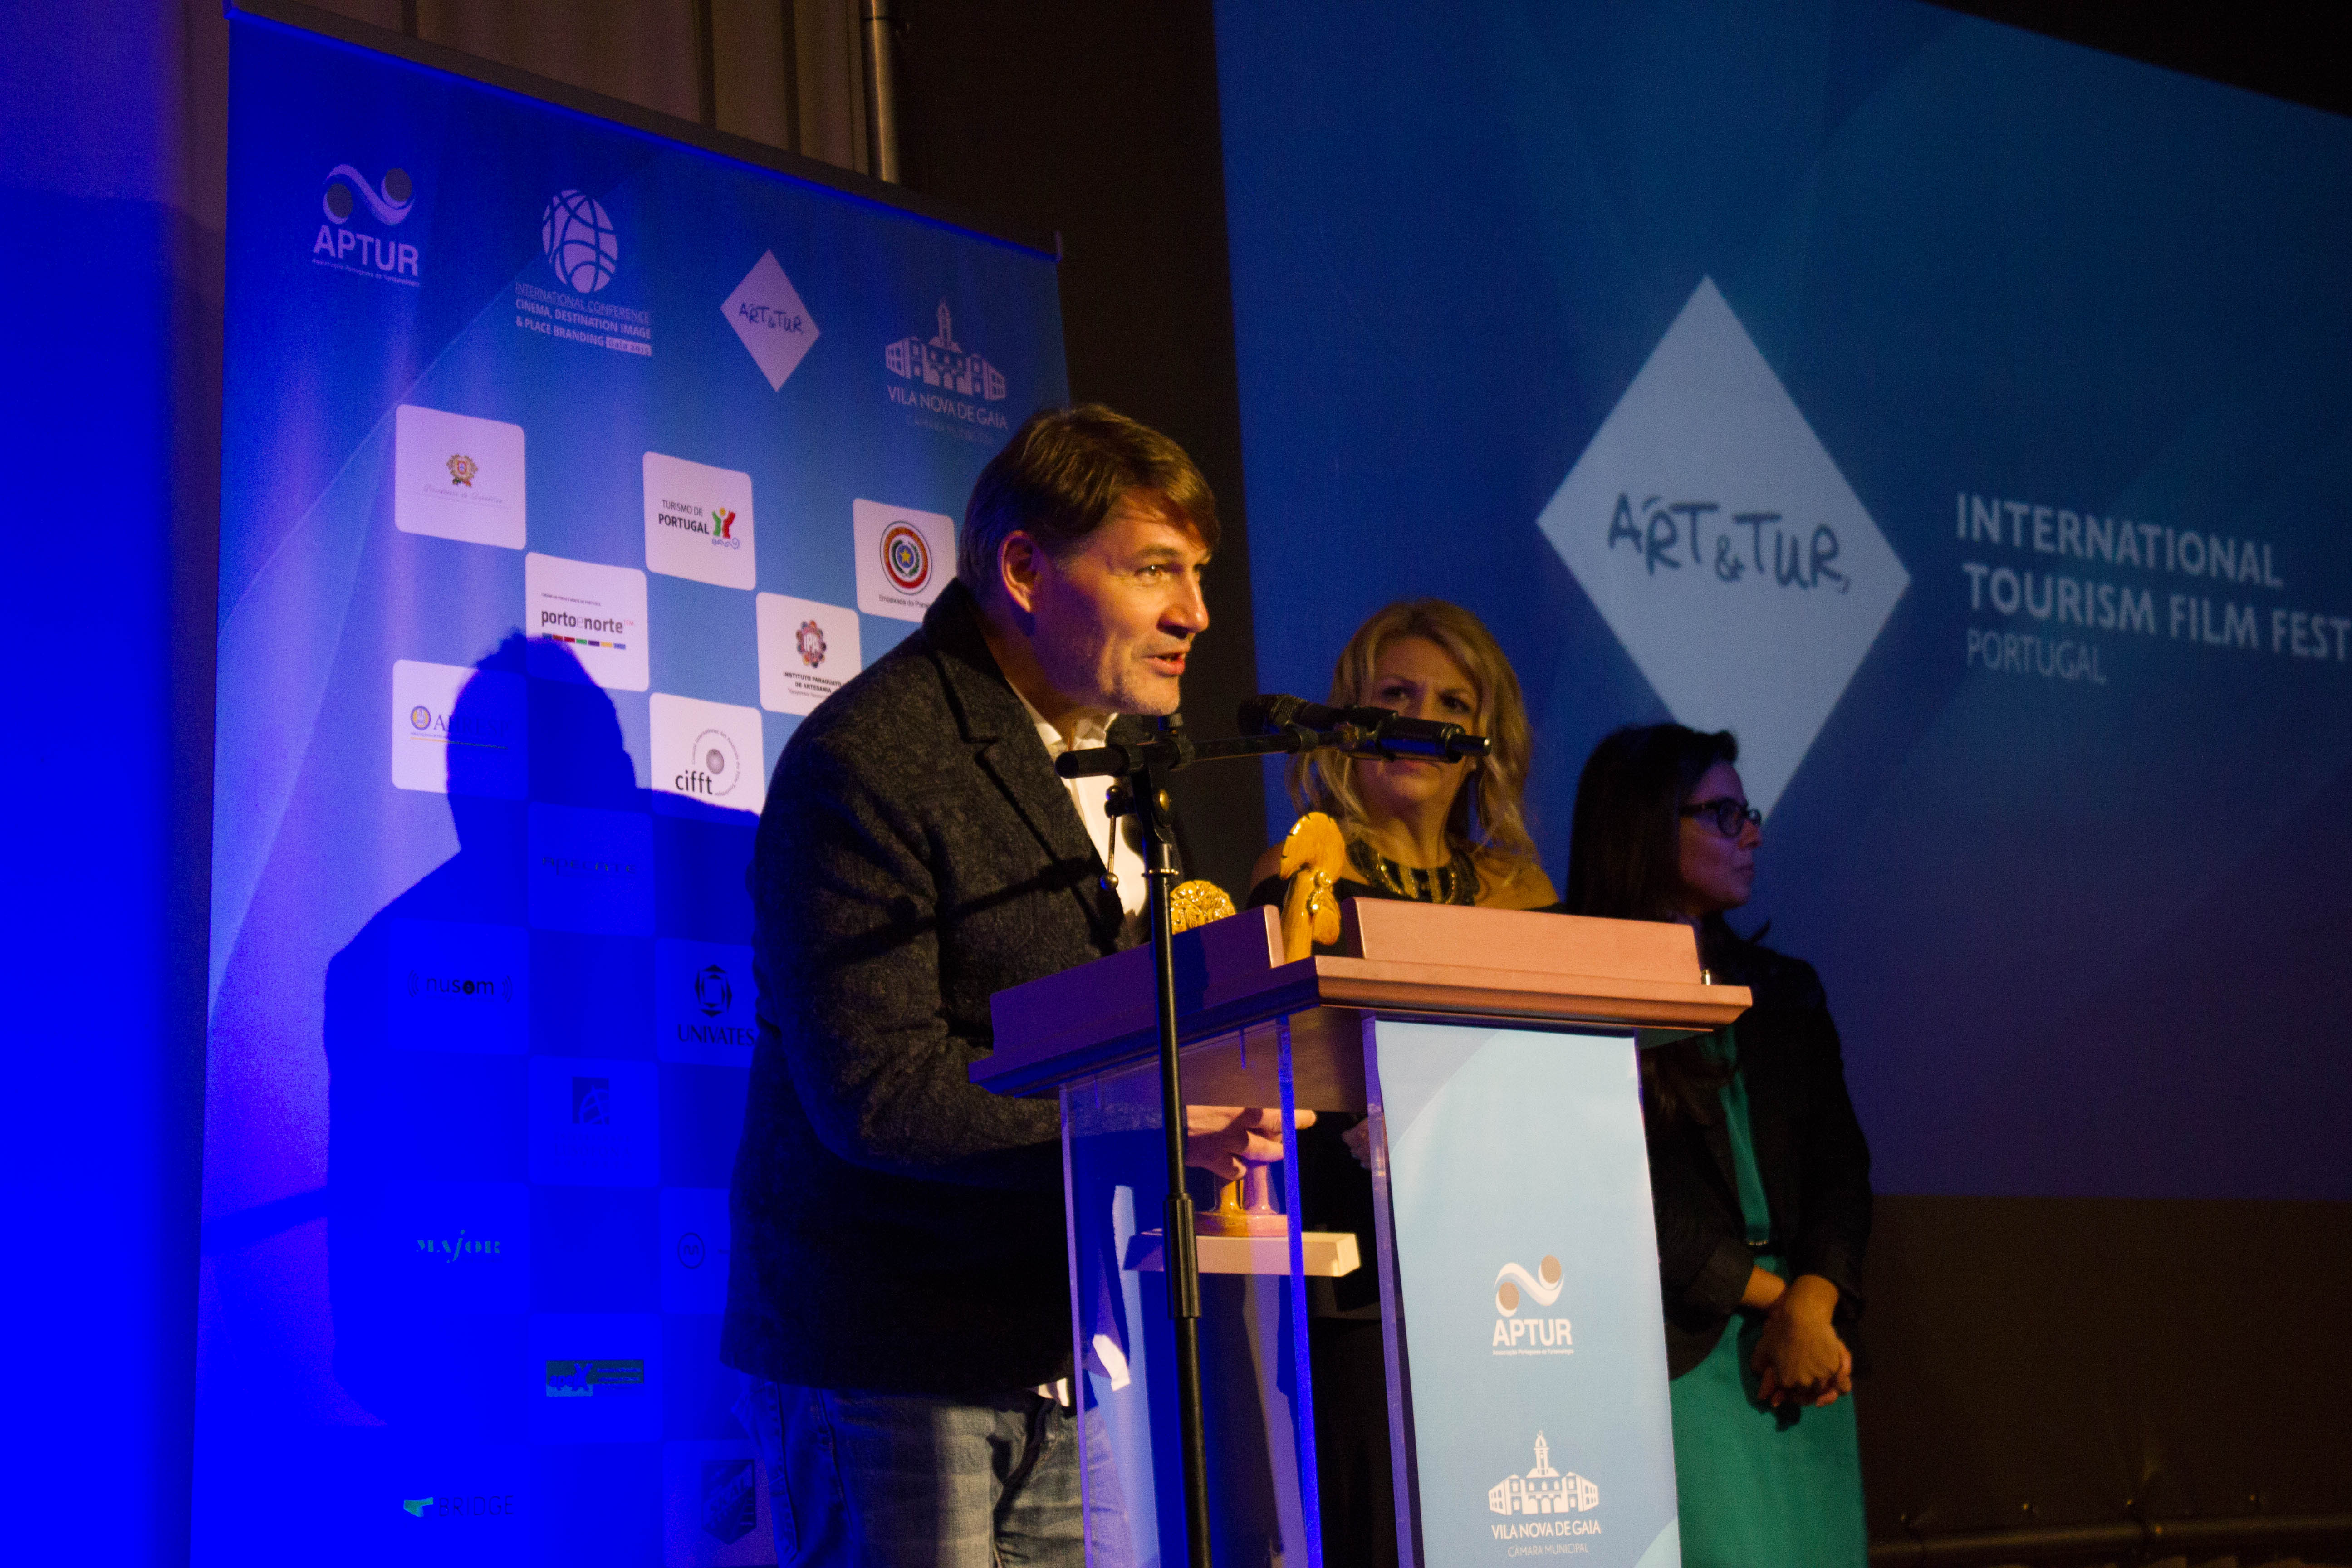 Jeremy JP Fekete by the ART&TUR Tourism Film Festival 2015 in Porto / receives the 